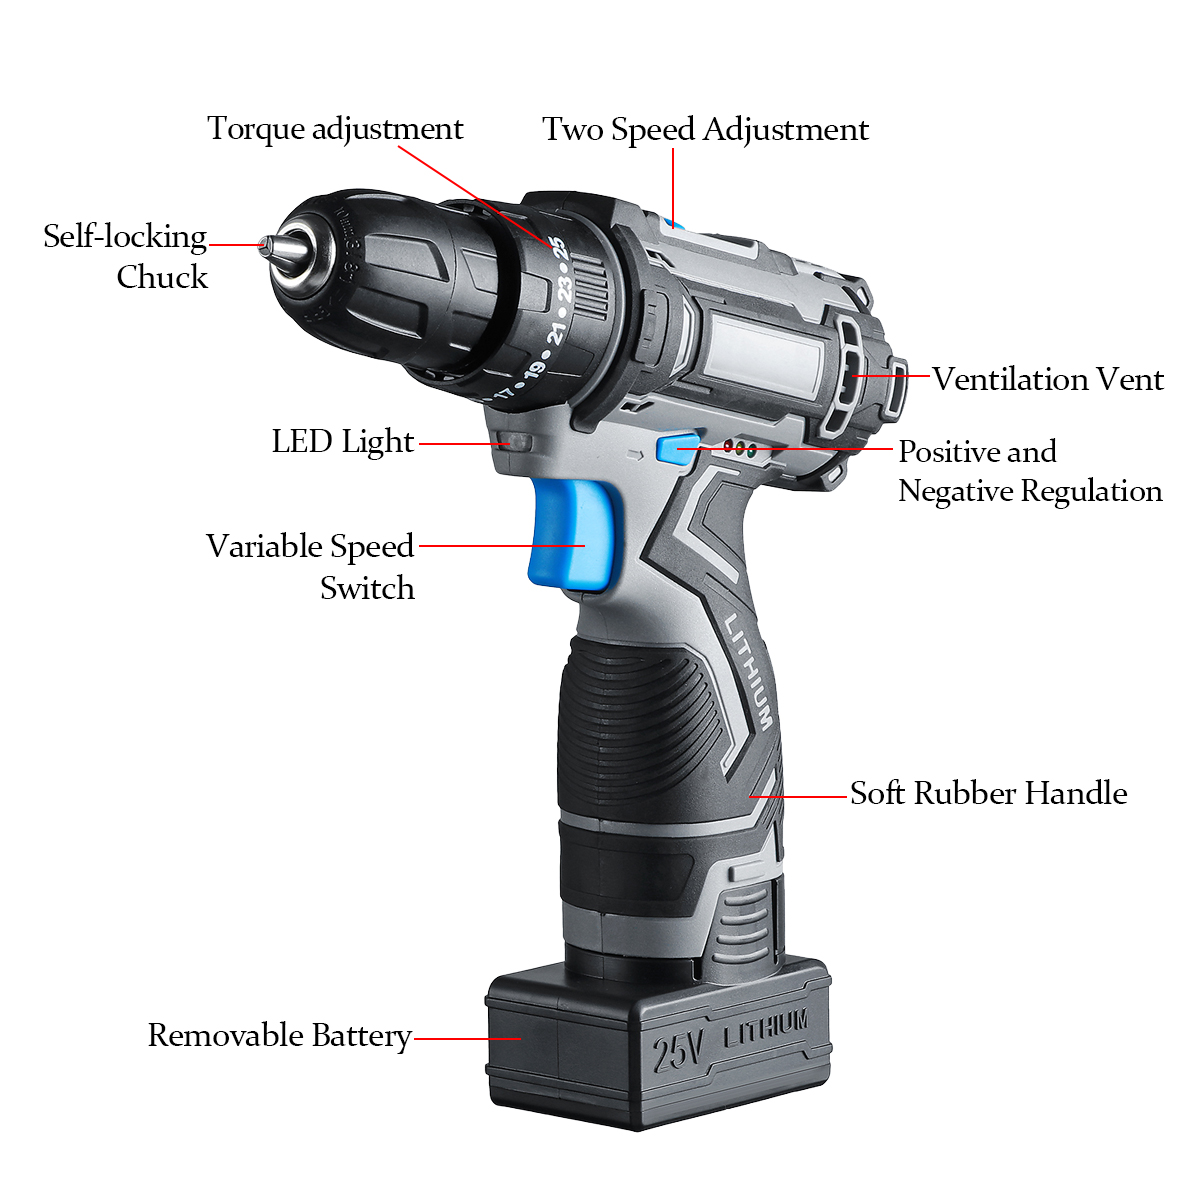 48Nm-25V-Electric-Drill-Cordless-Screwdriver-4000mAh-25-Gears-Household-Power-Tool-W-1pc-Battery-1792576-13